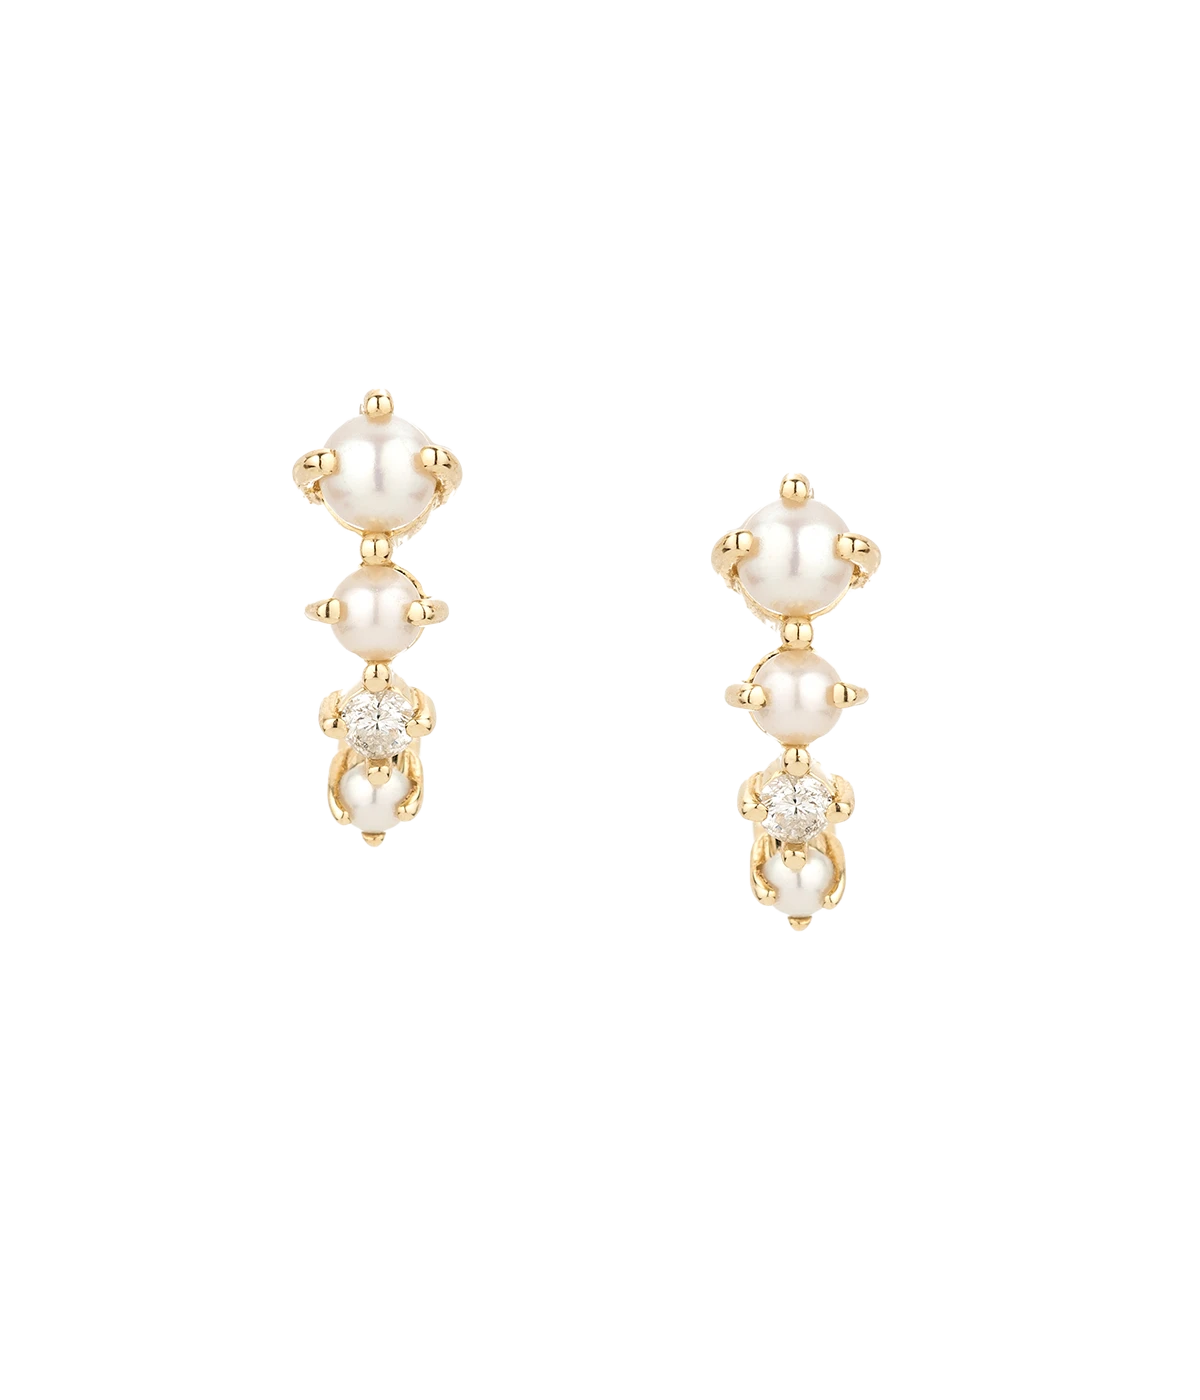 A delicate and dainty pair of j hoop earrings, these 14k yellow gold post graduated prong-set pearl and diamond earrings hug the ear. Fine jewellery, yellow gold jewellery, every day wear, minimal jewellery.